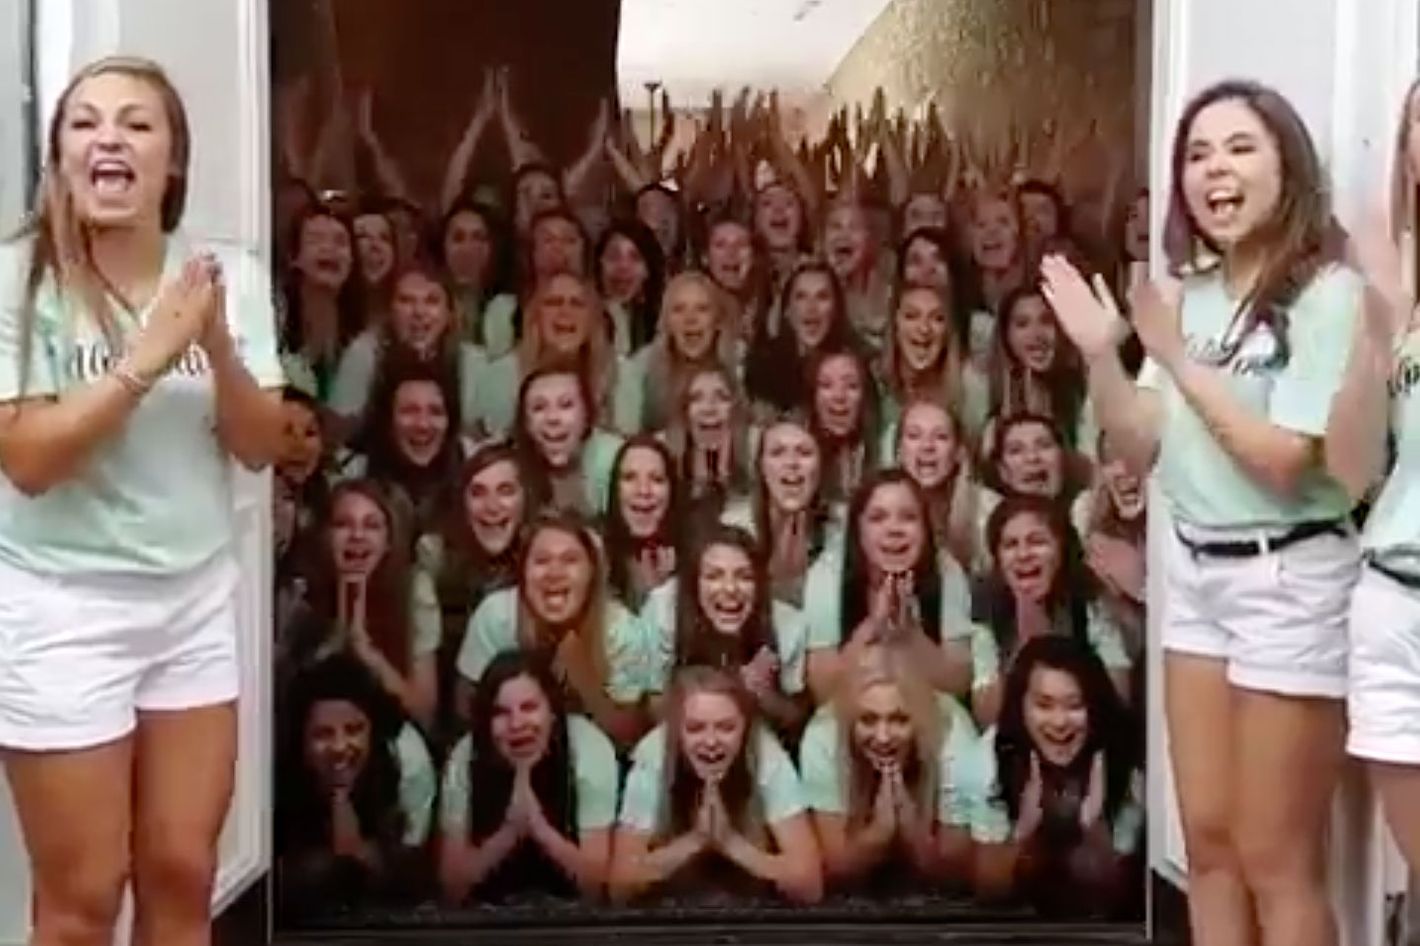 charles karthik recommends College Sorority Hazing Videos